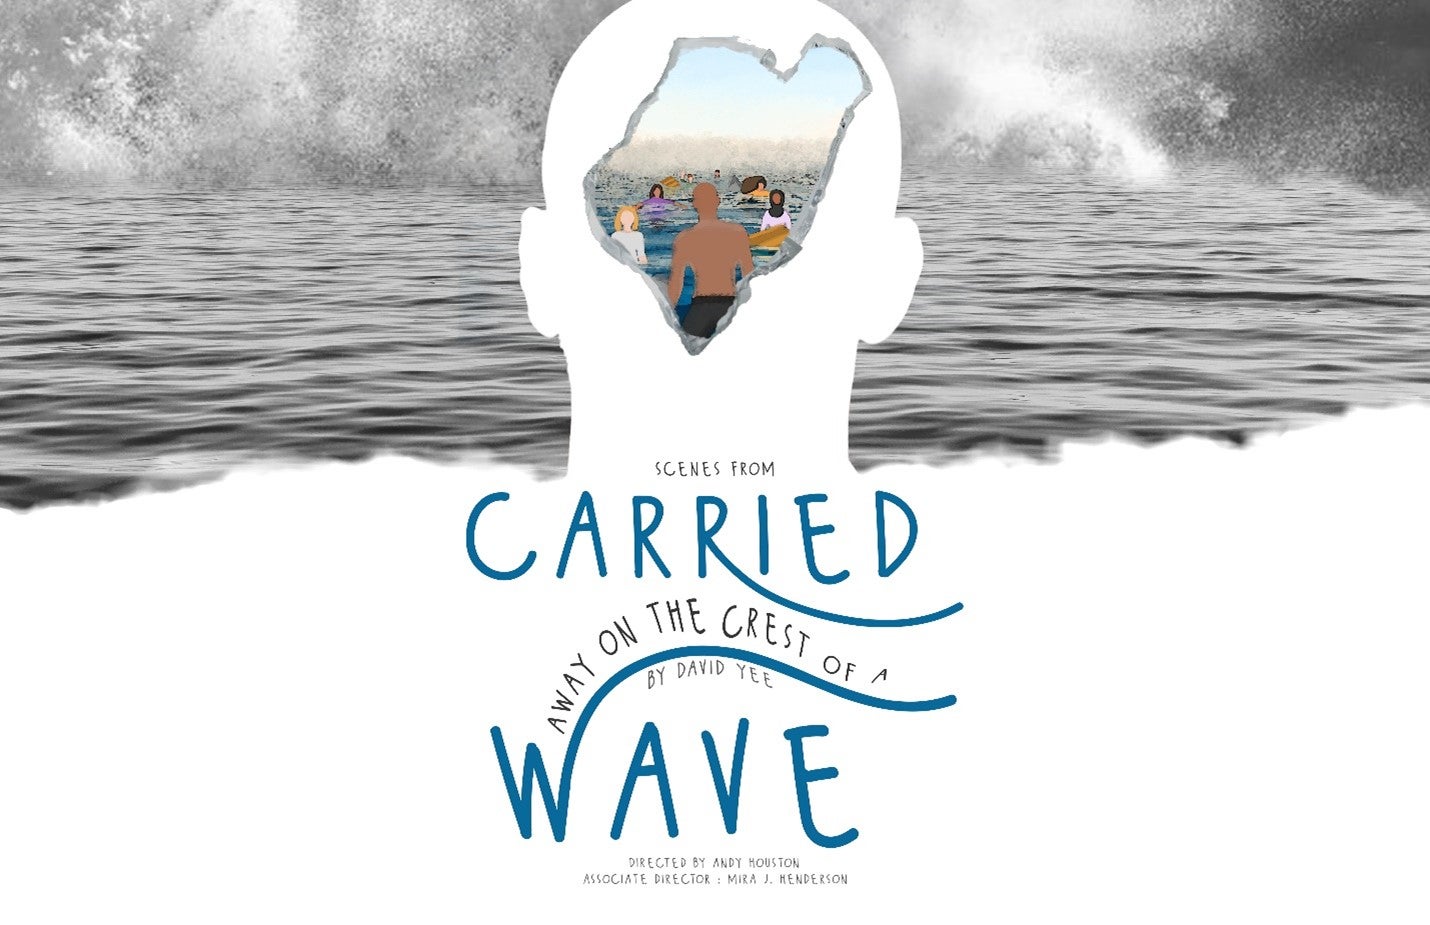 event poster design showing people and waves